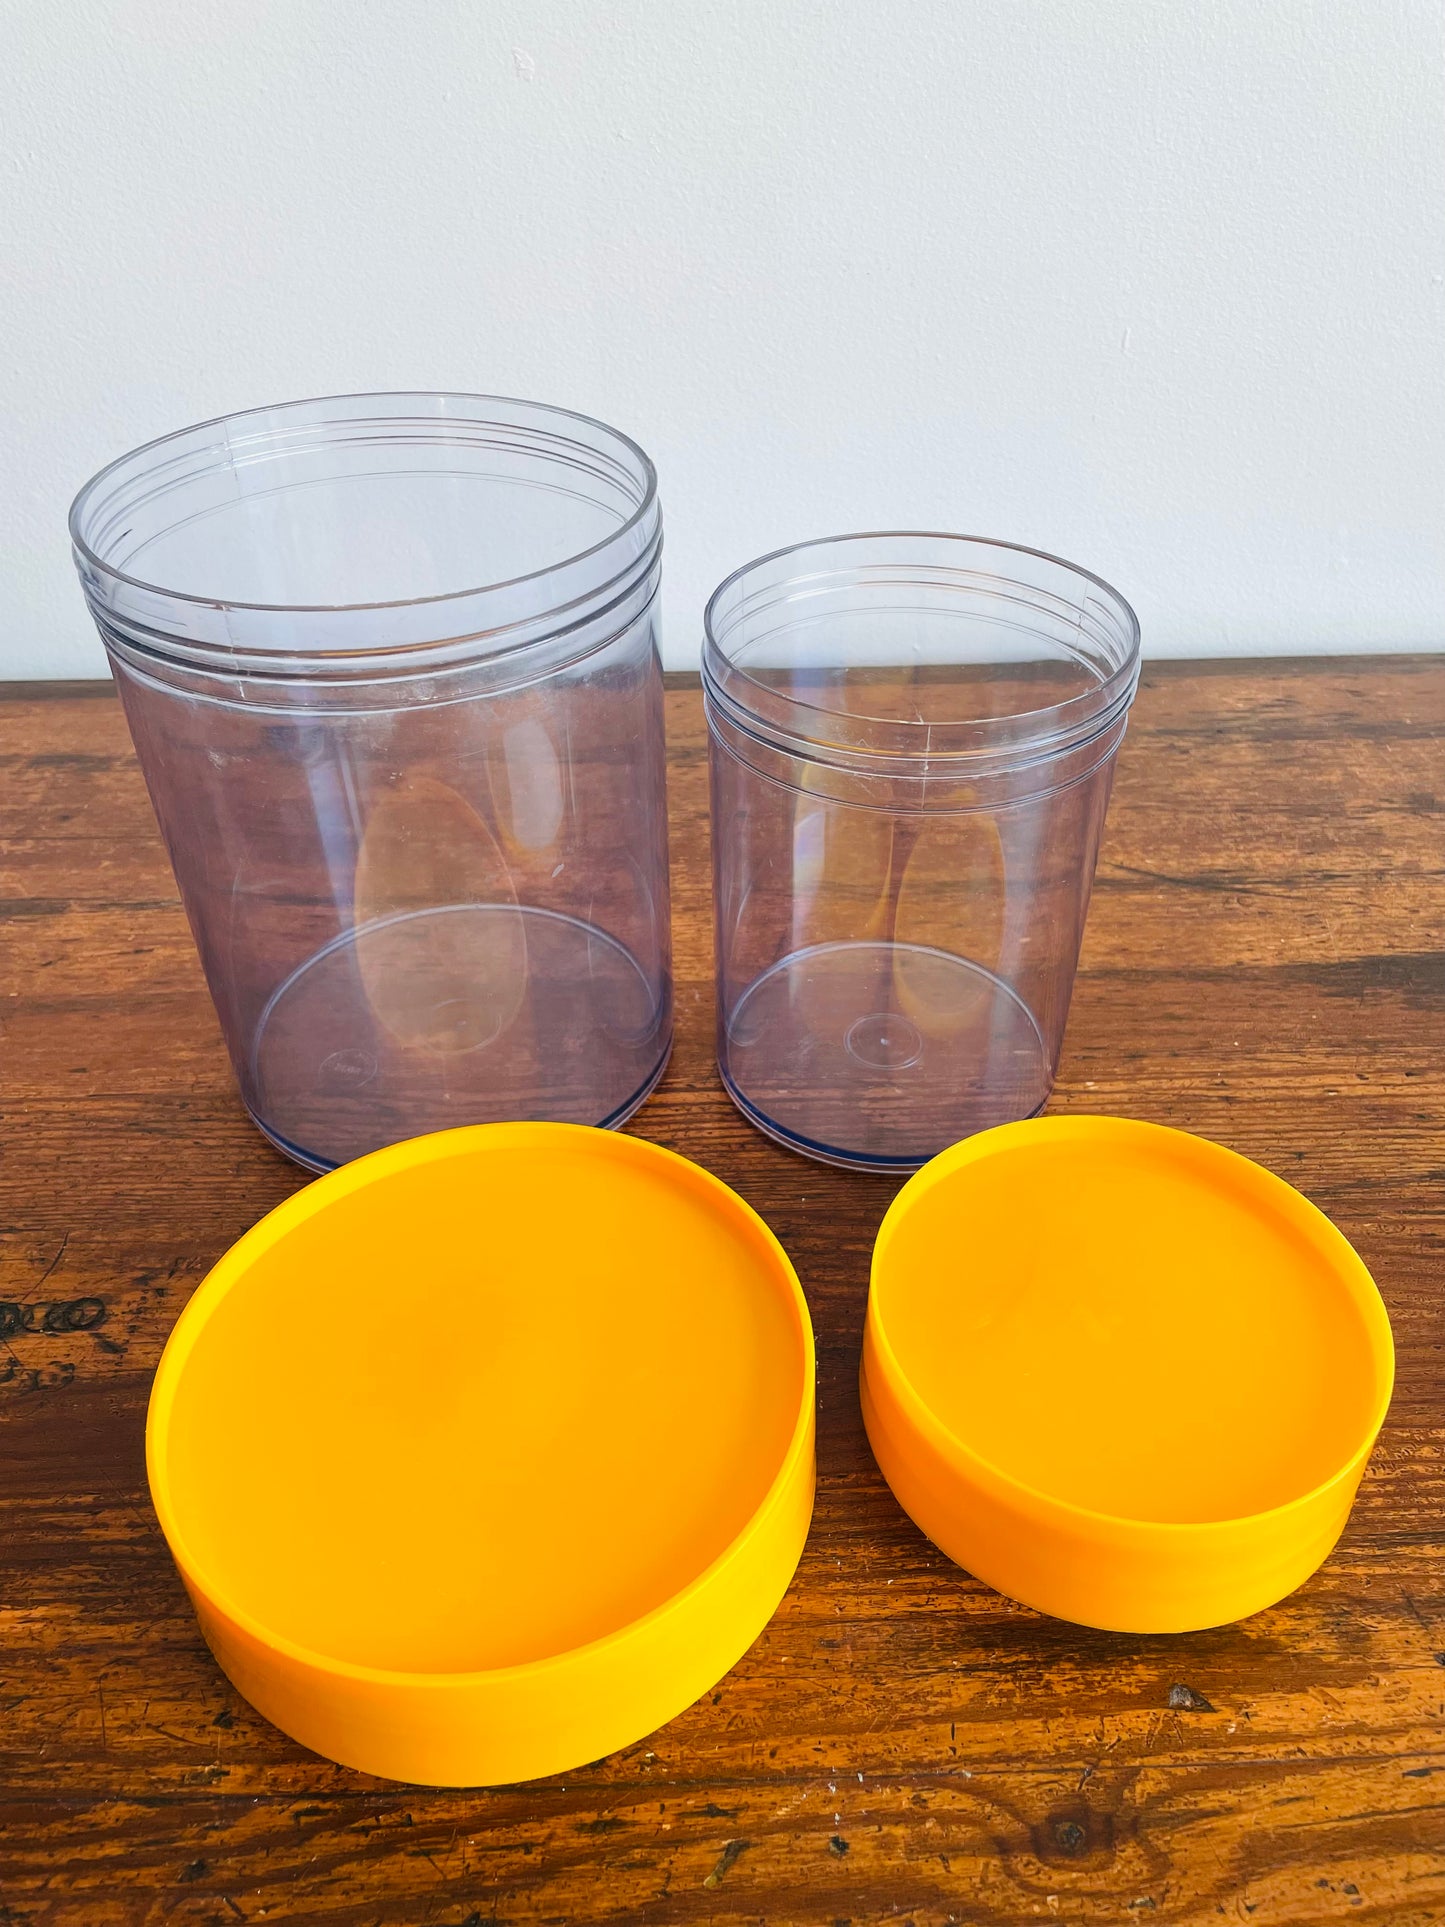 1970s Erik Kold Plastic Stacking Containers with Bright Yellow Lids - Made in Denmark - Set of 2